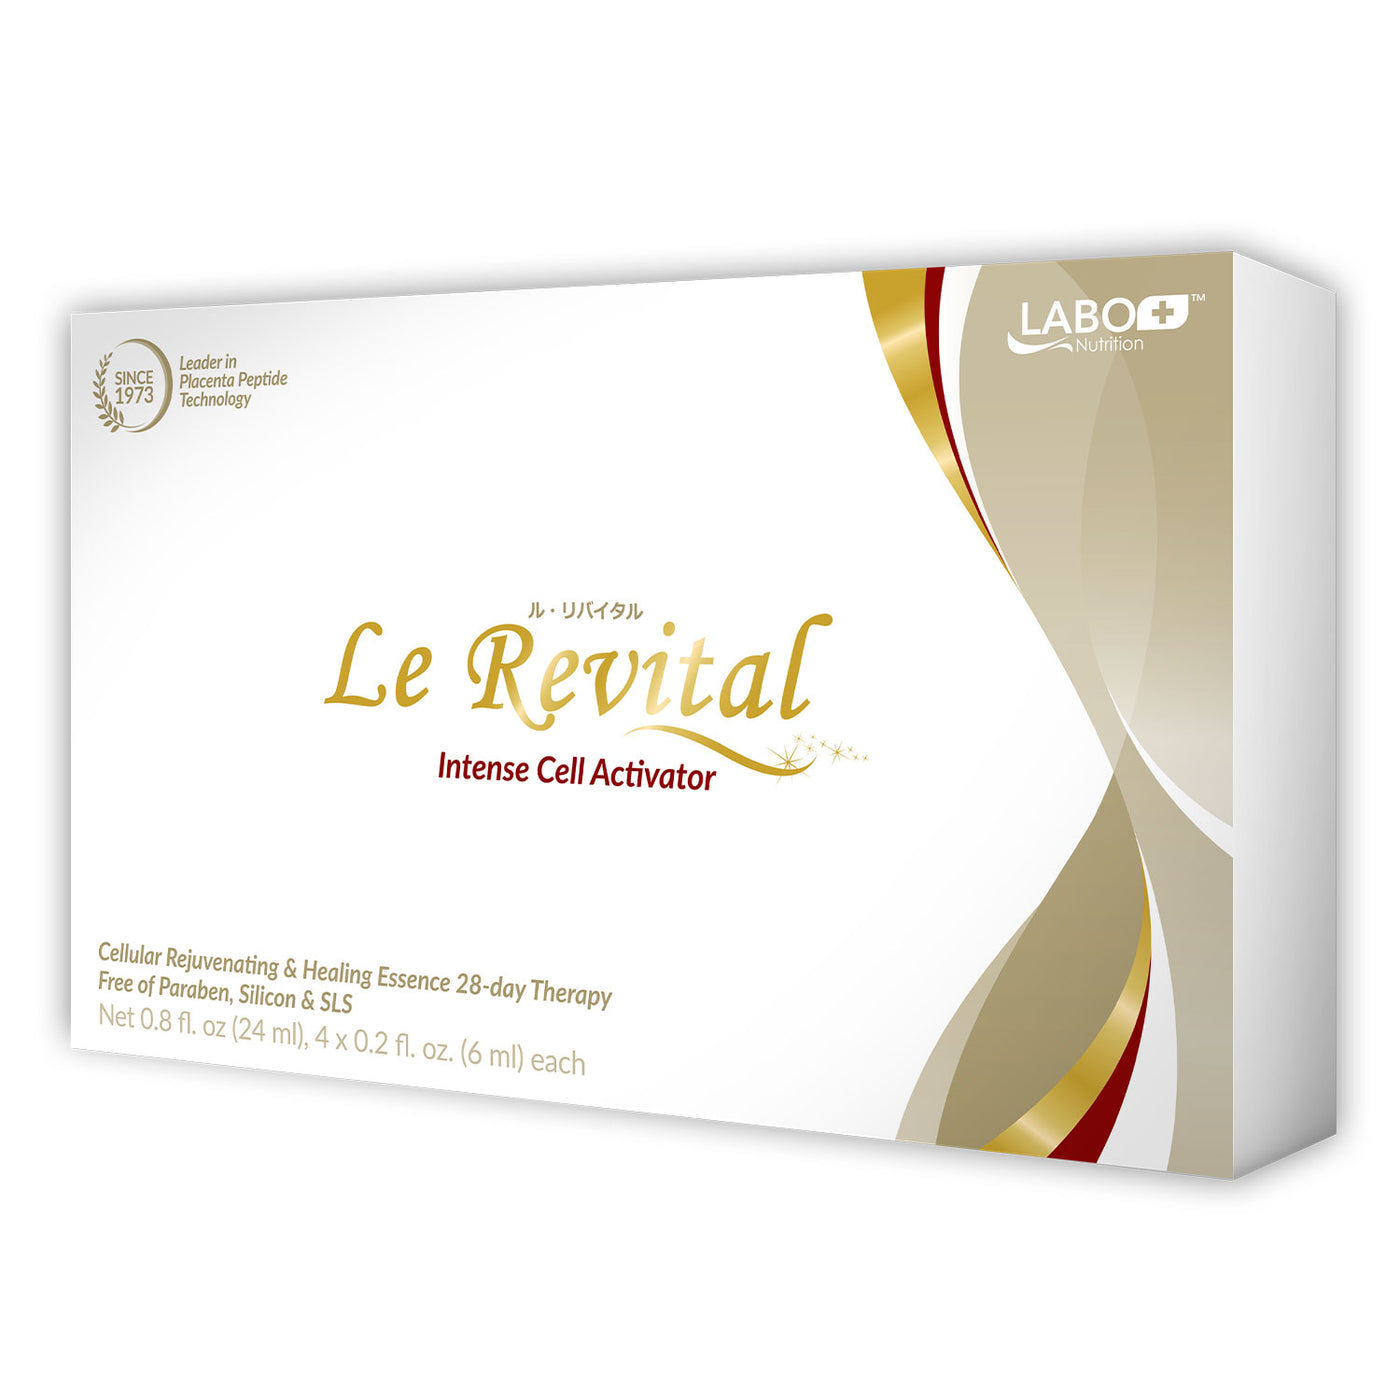 Le Revital 98% Concentrated Nano Placenta Extract, Umbilical Extract & Sodium Hyaluronate Anti-Aging Serum –Reduce Wrinkles, Dark Spot + Hydration - Lifestream Group US